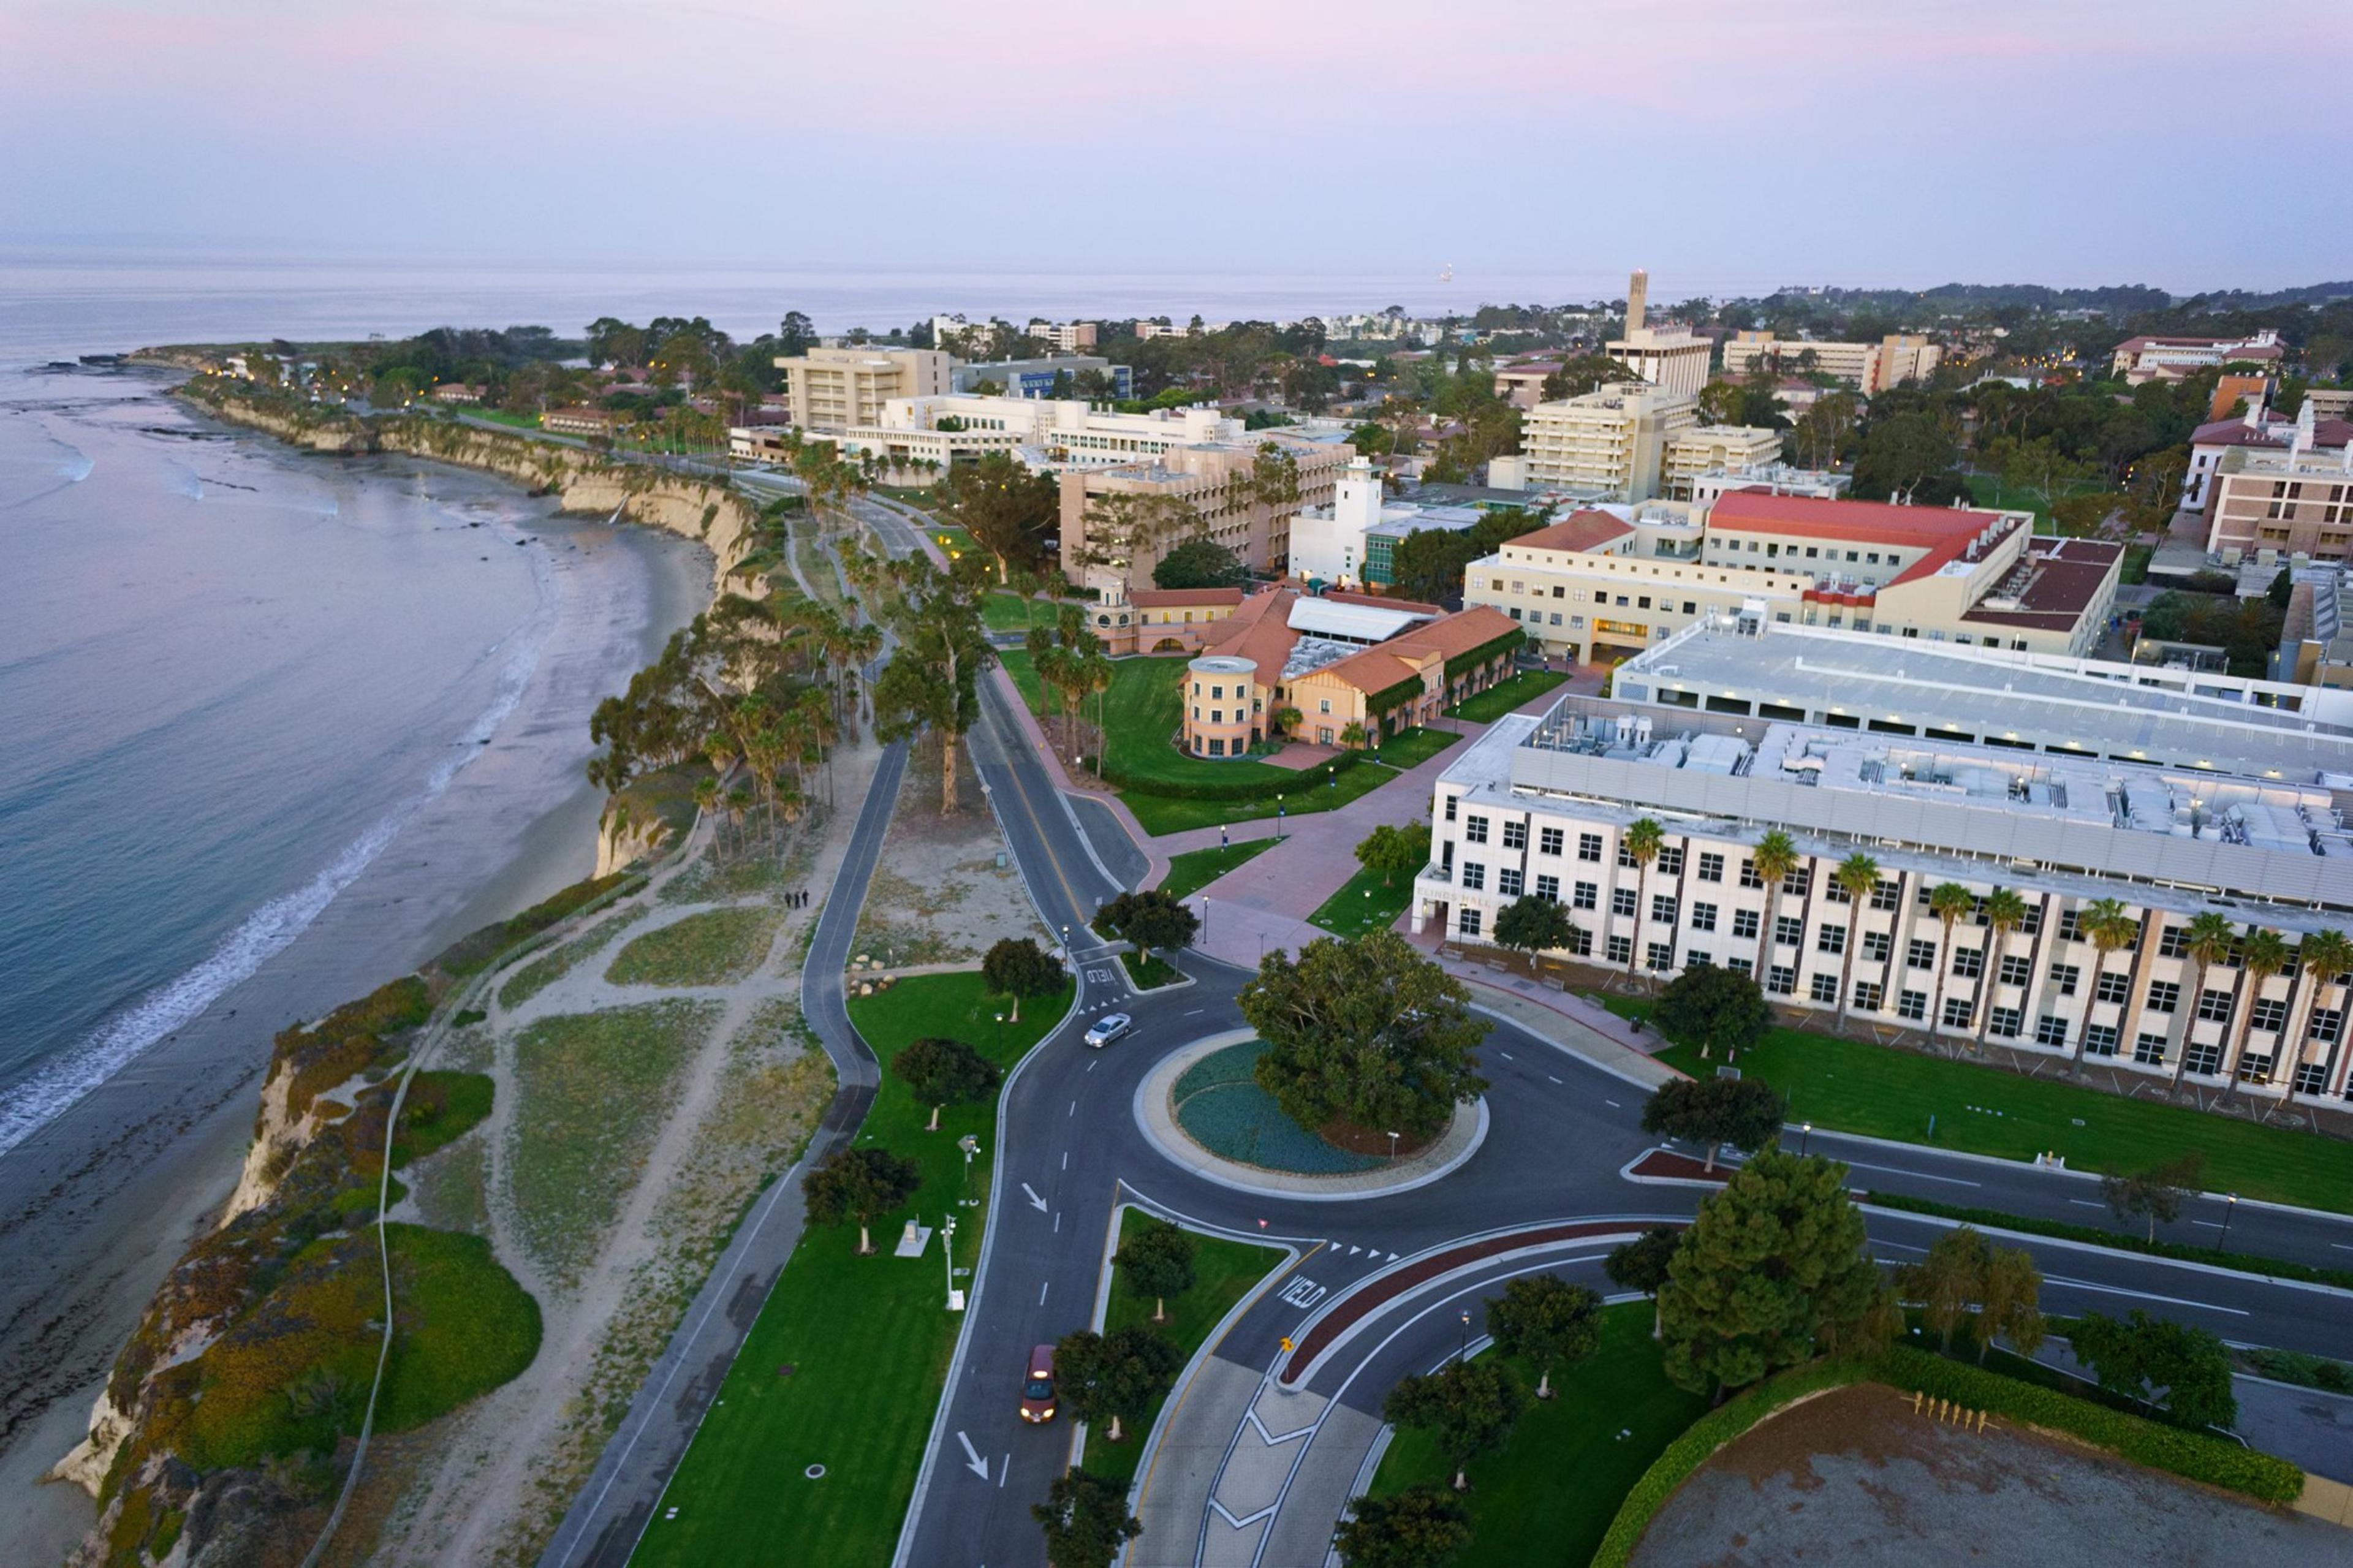 UCSB Conference & Hospitality Services